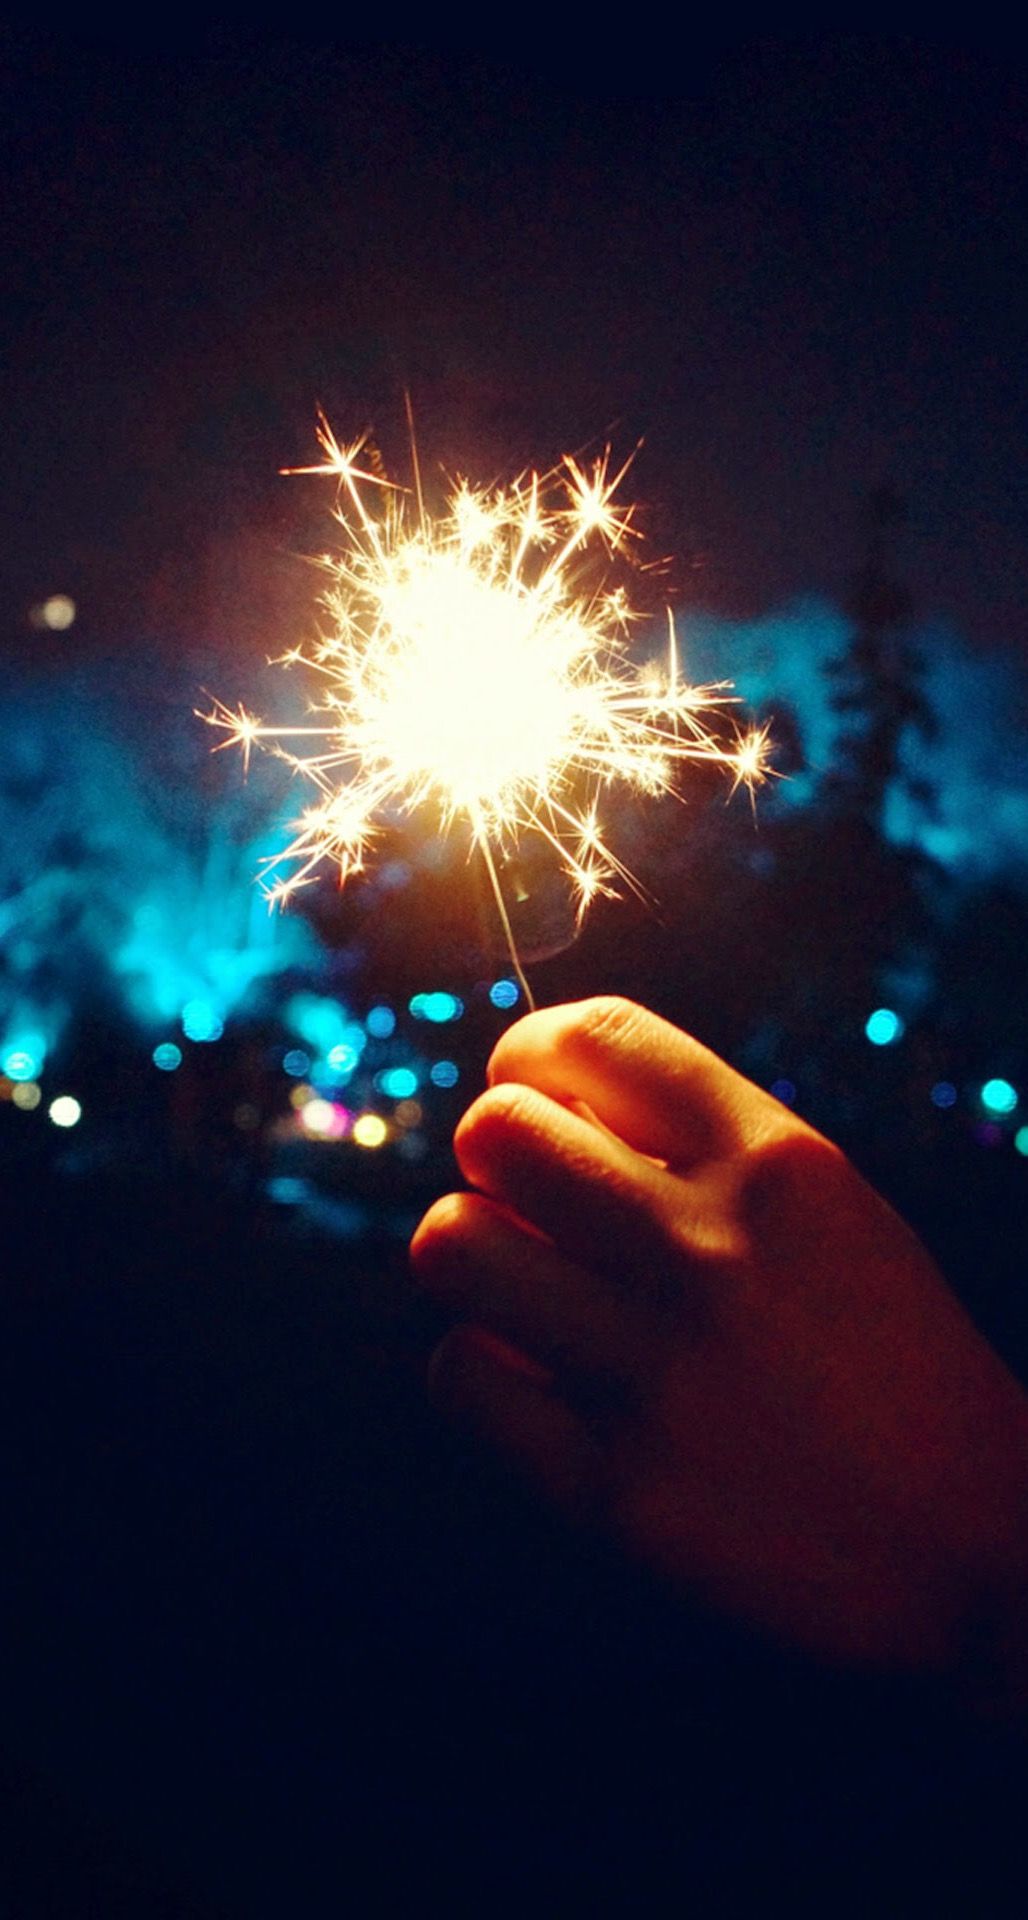 A person holding up sparklers in the dark - New Year